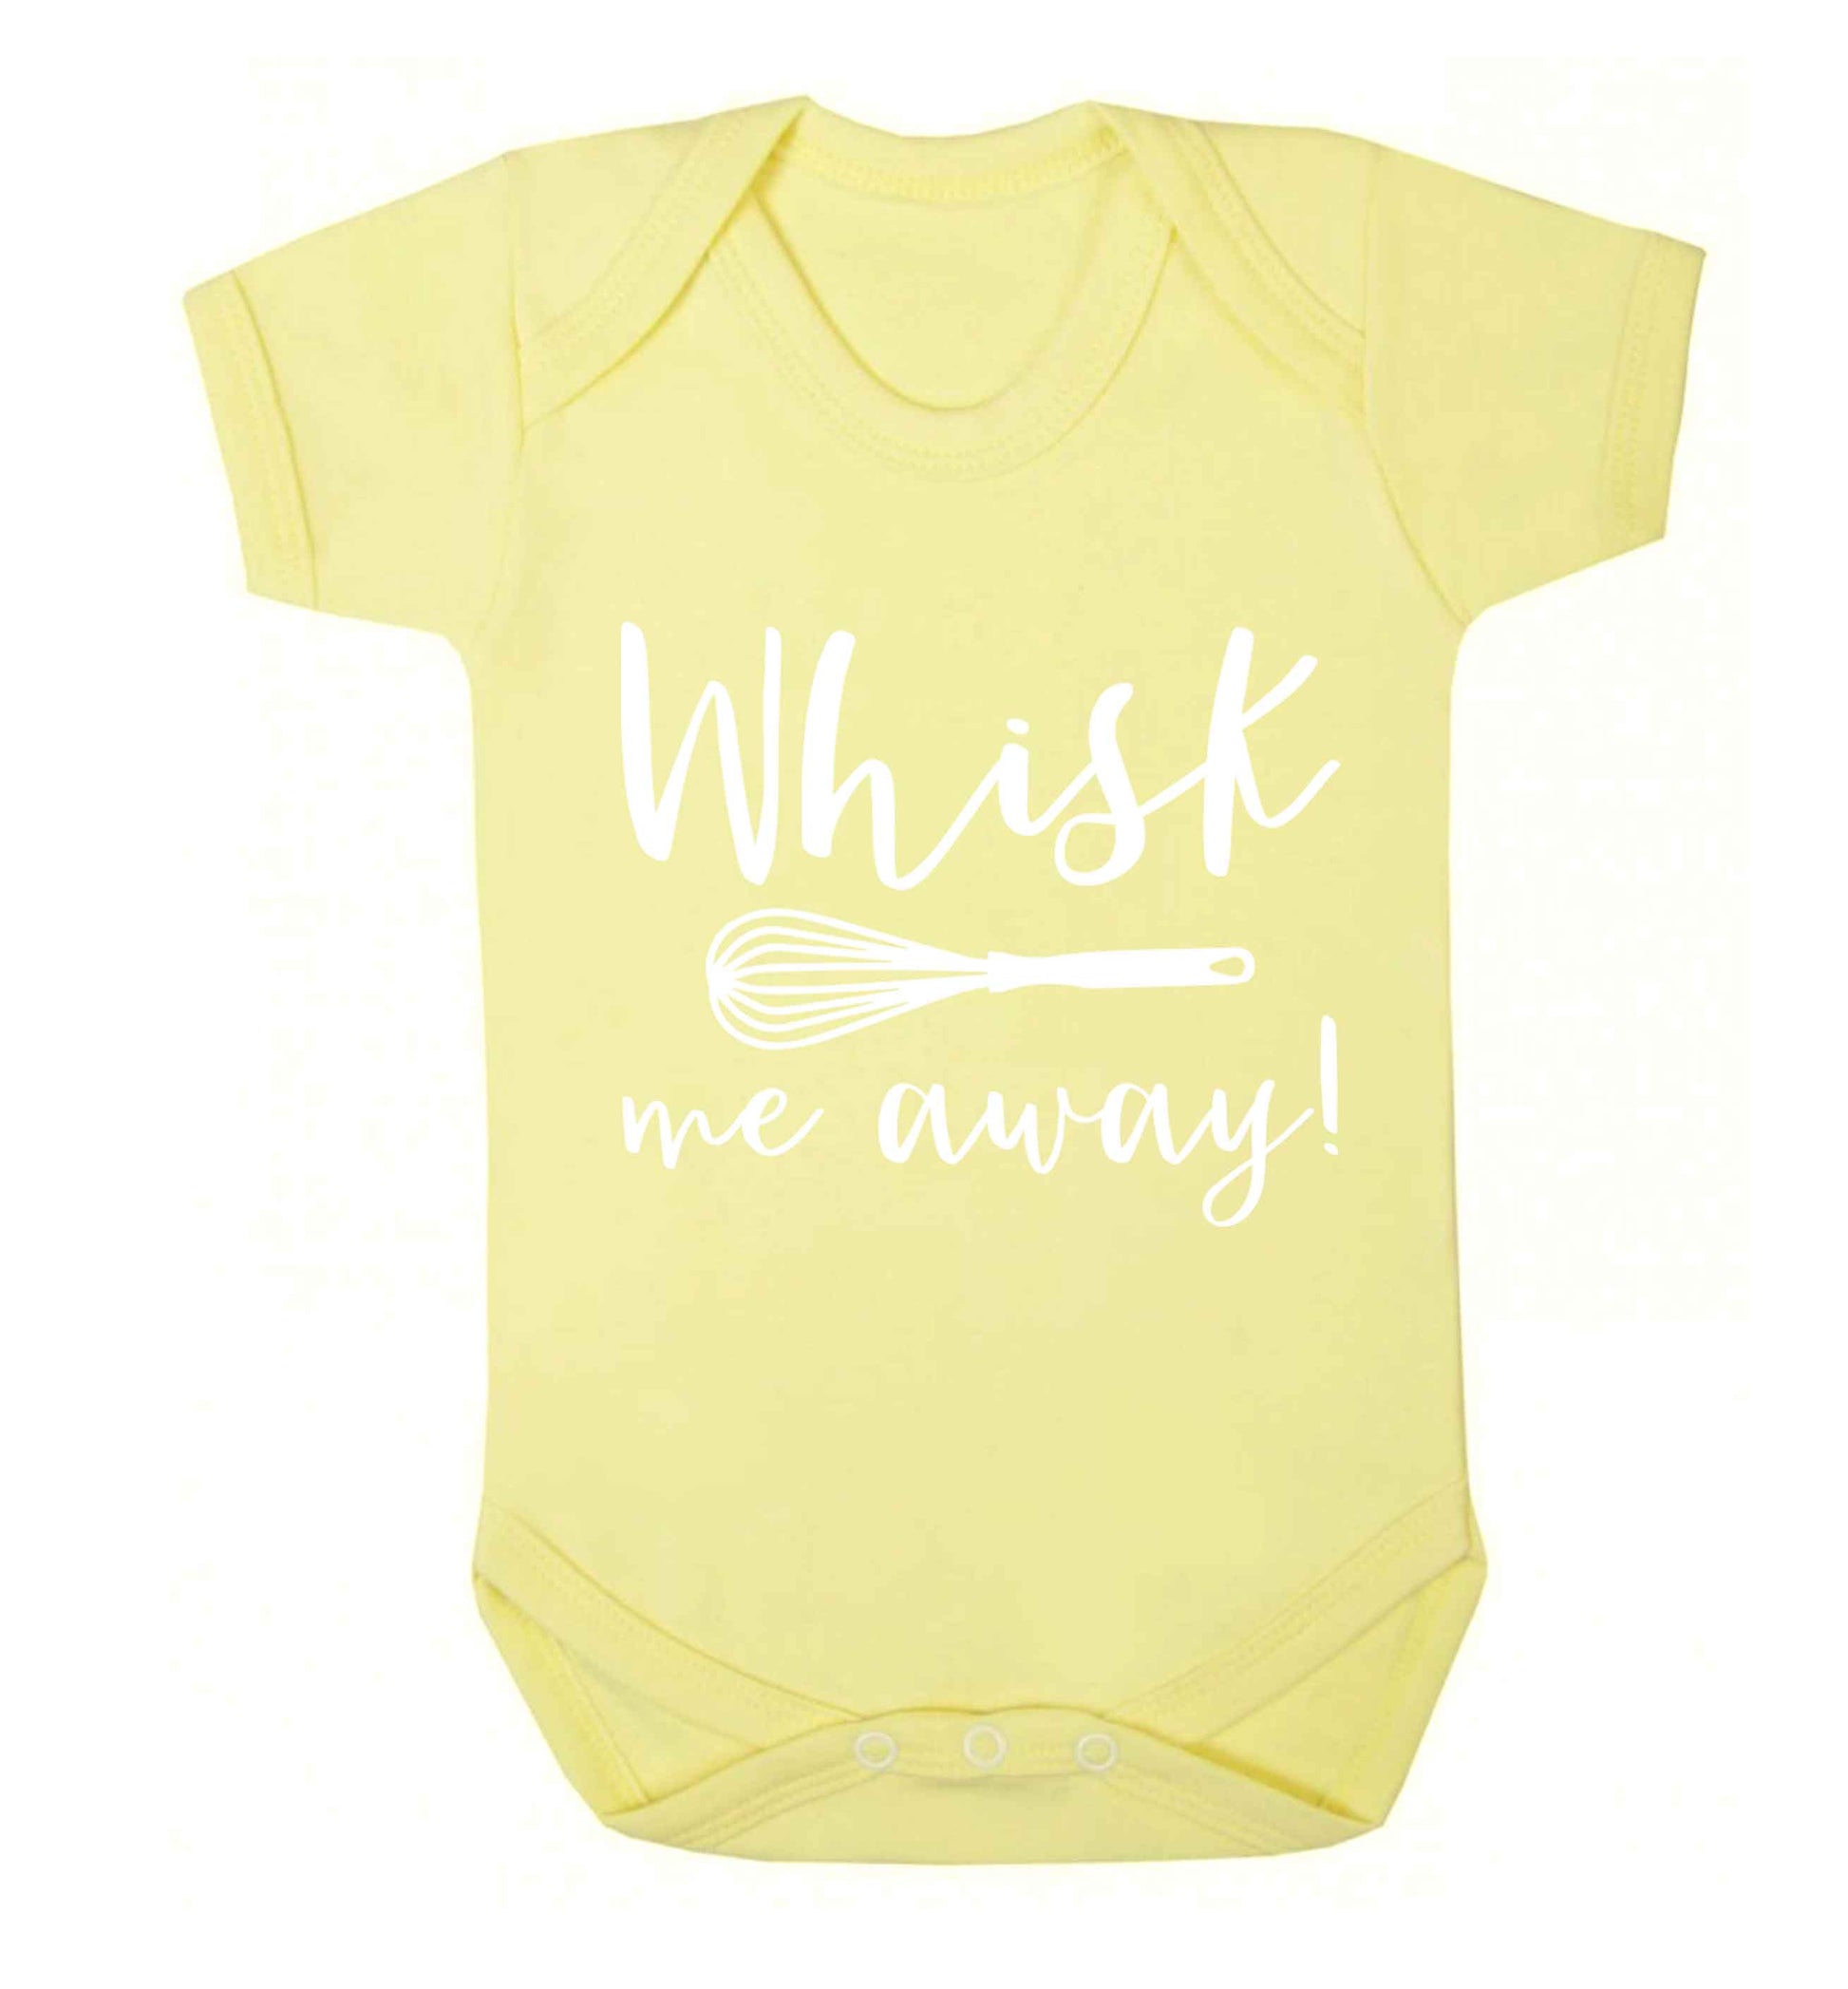 Whisk me away Baby Vest pale yellow 18-24 months